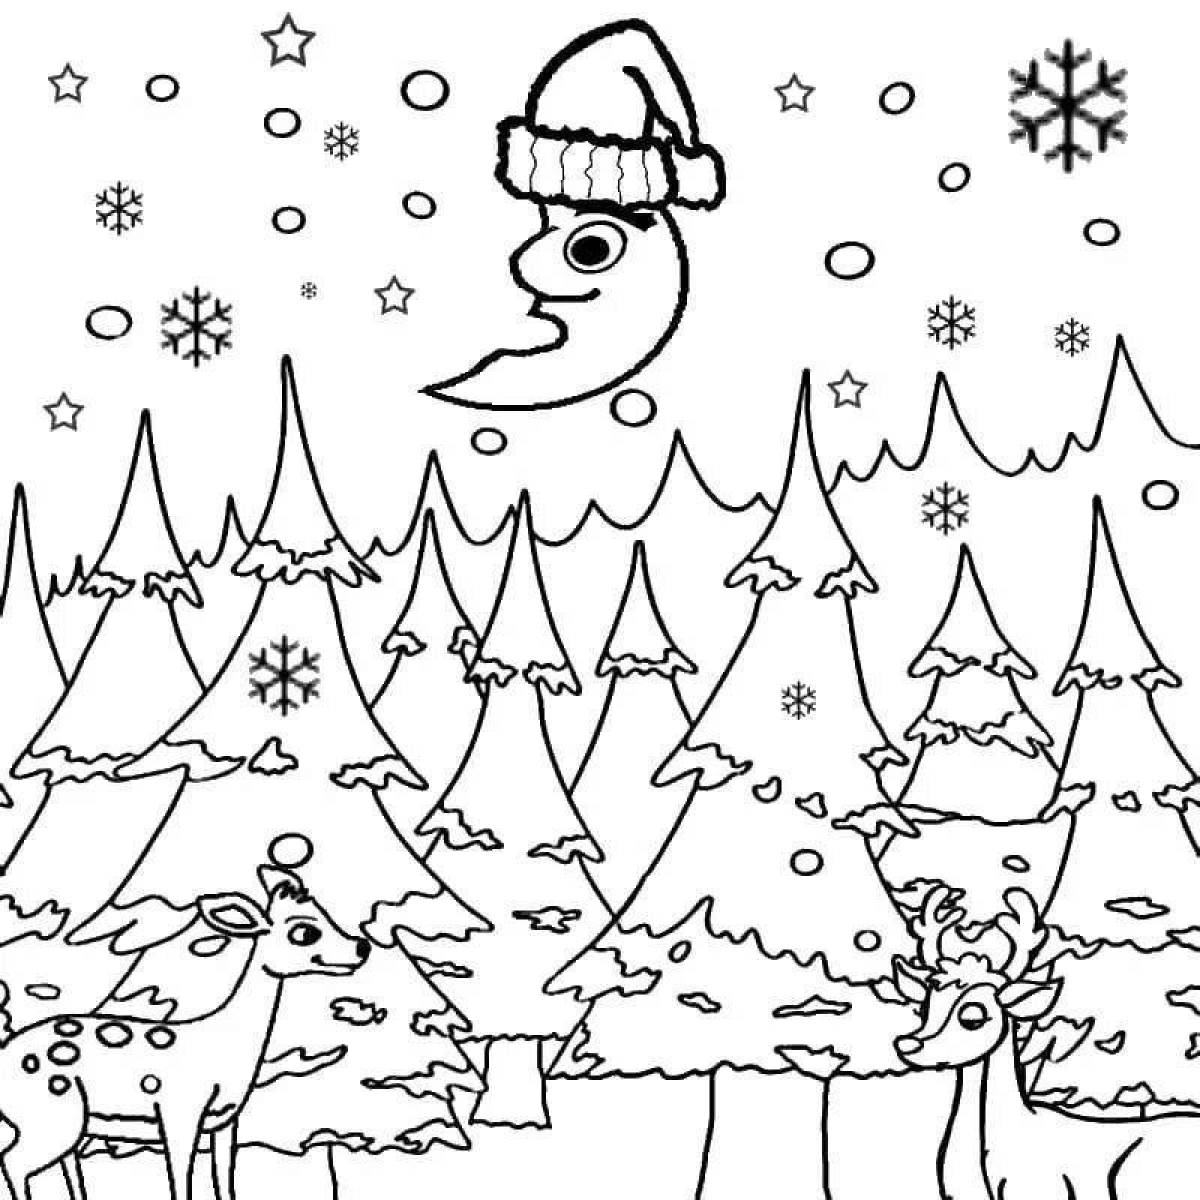 Fun drawing of a winter landscape for kids